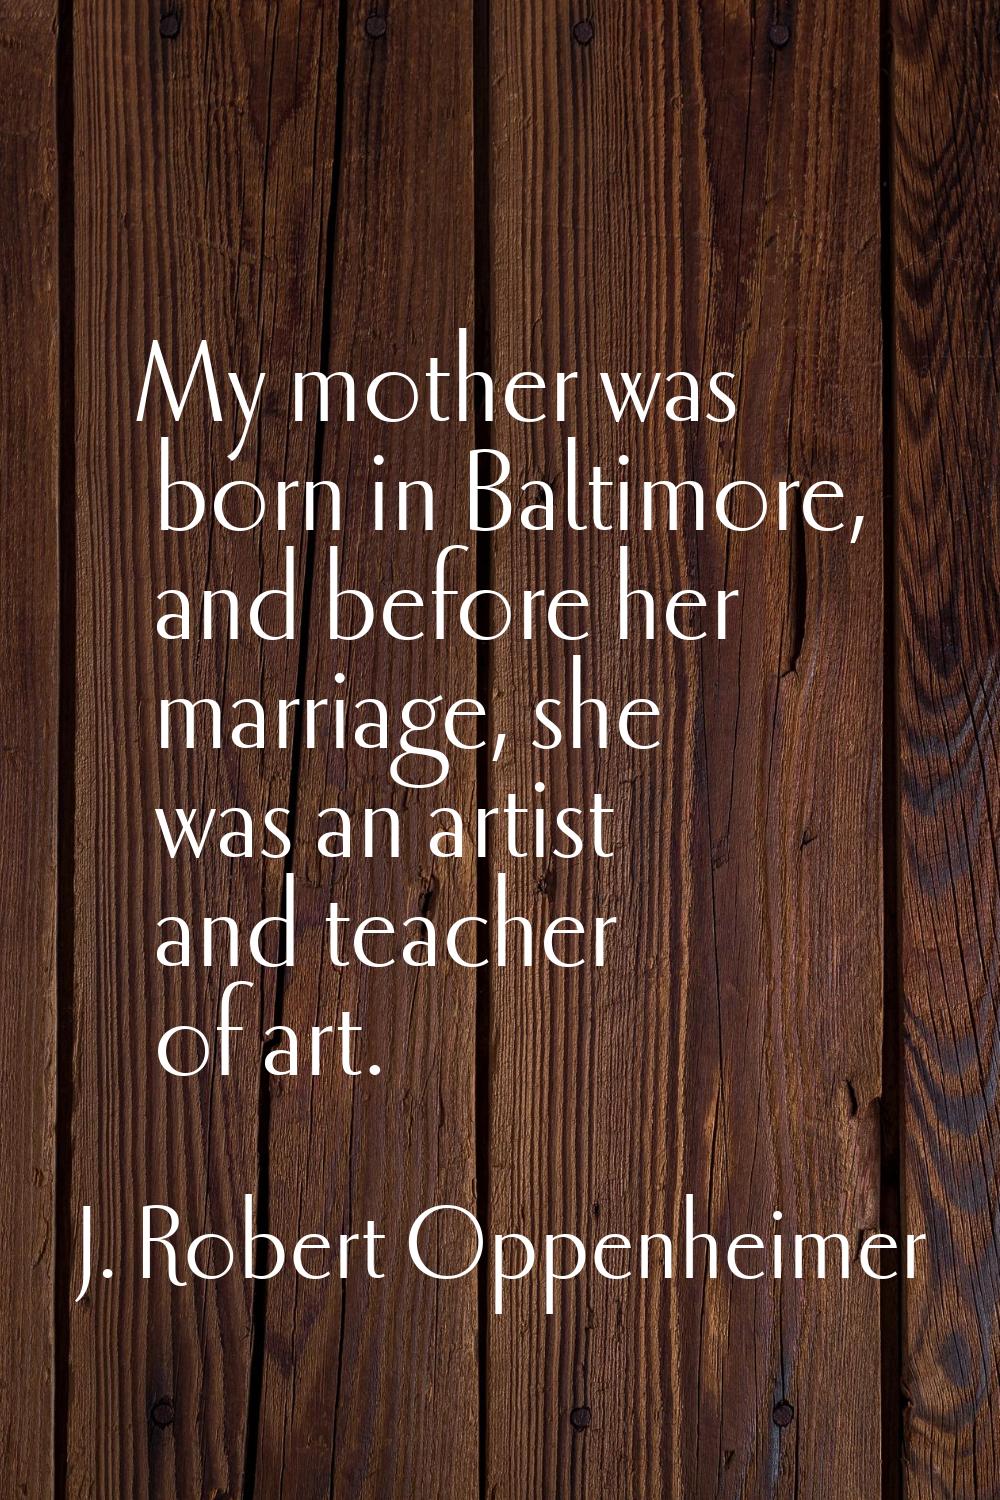 My mother was born in Baltimore, and before her marriage, she was an artist and teacher of art.